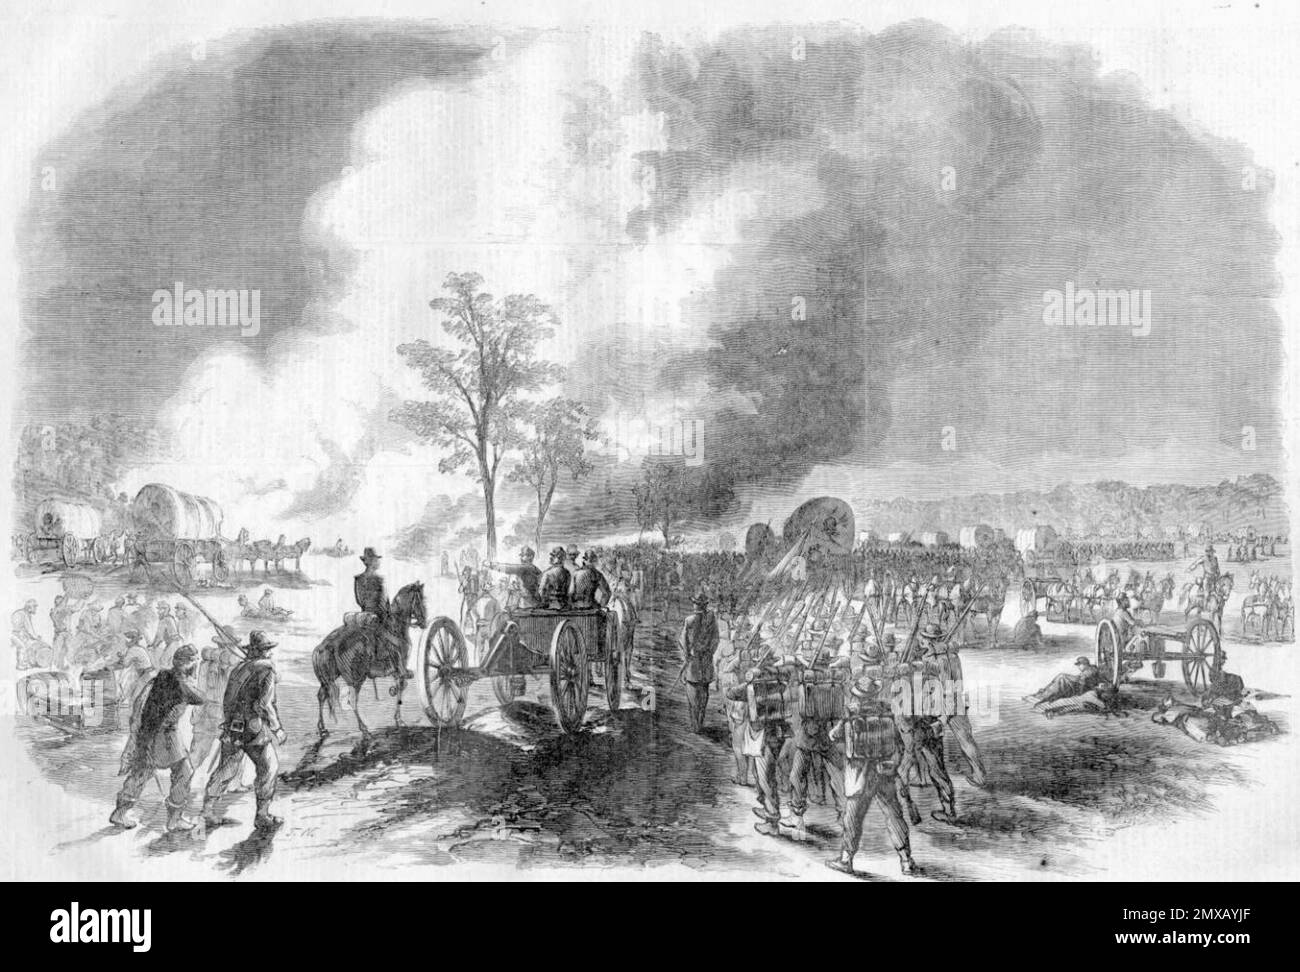 The Battle of Seven Pines (also known as the Battle of Fair Oaks or Fair Oaks Station) took place on May 31 and June 1, 1862, in Henrico County, Virginia as part of the Peninsula Campaign of the American Civil War. It was the culmination of an offensive up the Virginia Peninsula led by Union Major General George McClellan, in which the Army of the Potomac reached the outskirts of Richmond. This image depicts the retreat of General William Franklin's corps at the Battle of Fair Oaks, 29 June 1862. Stock Photo